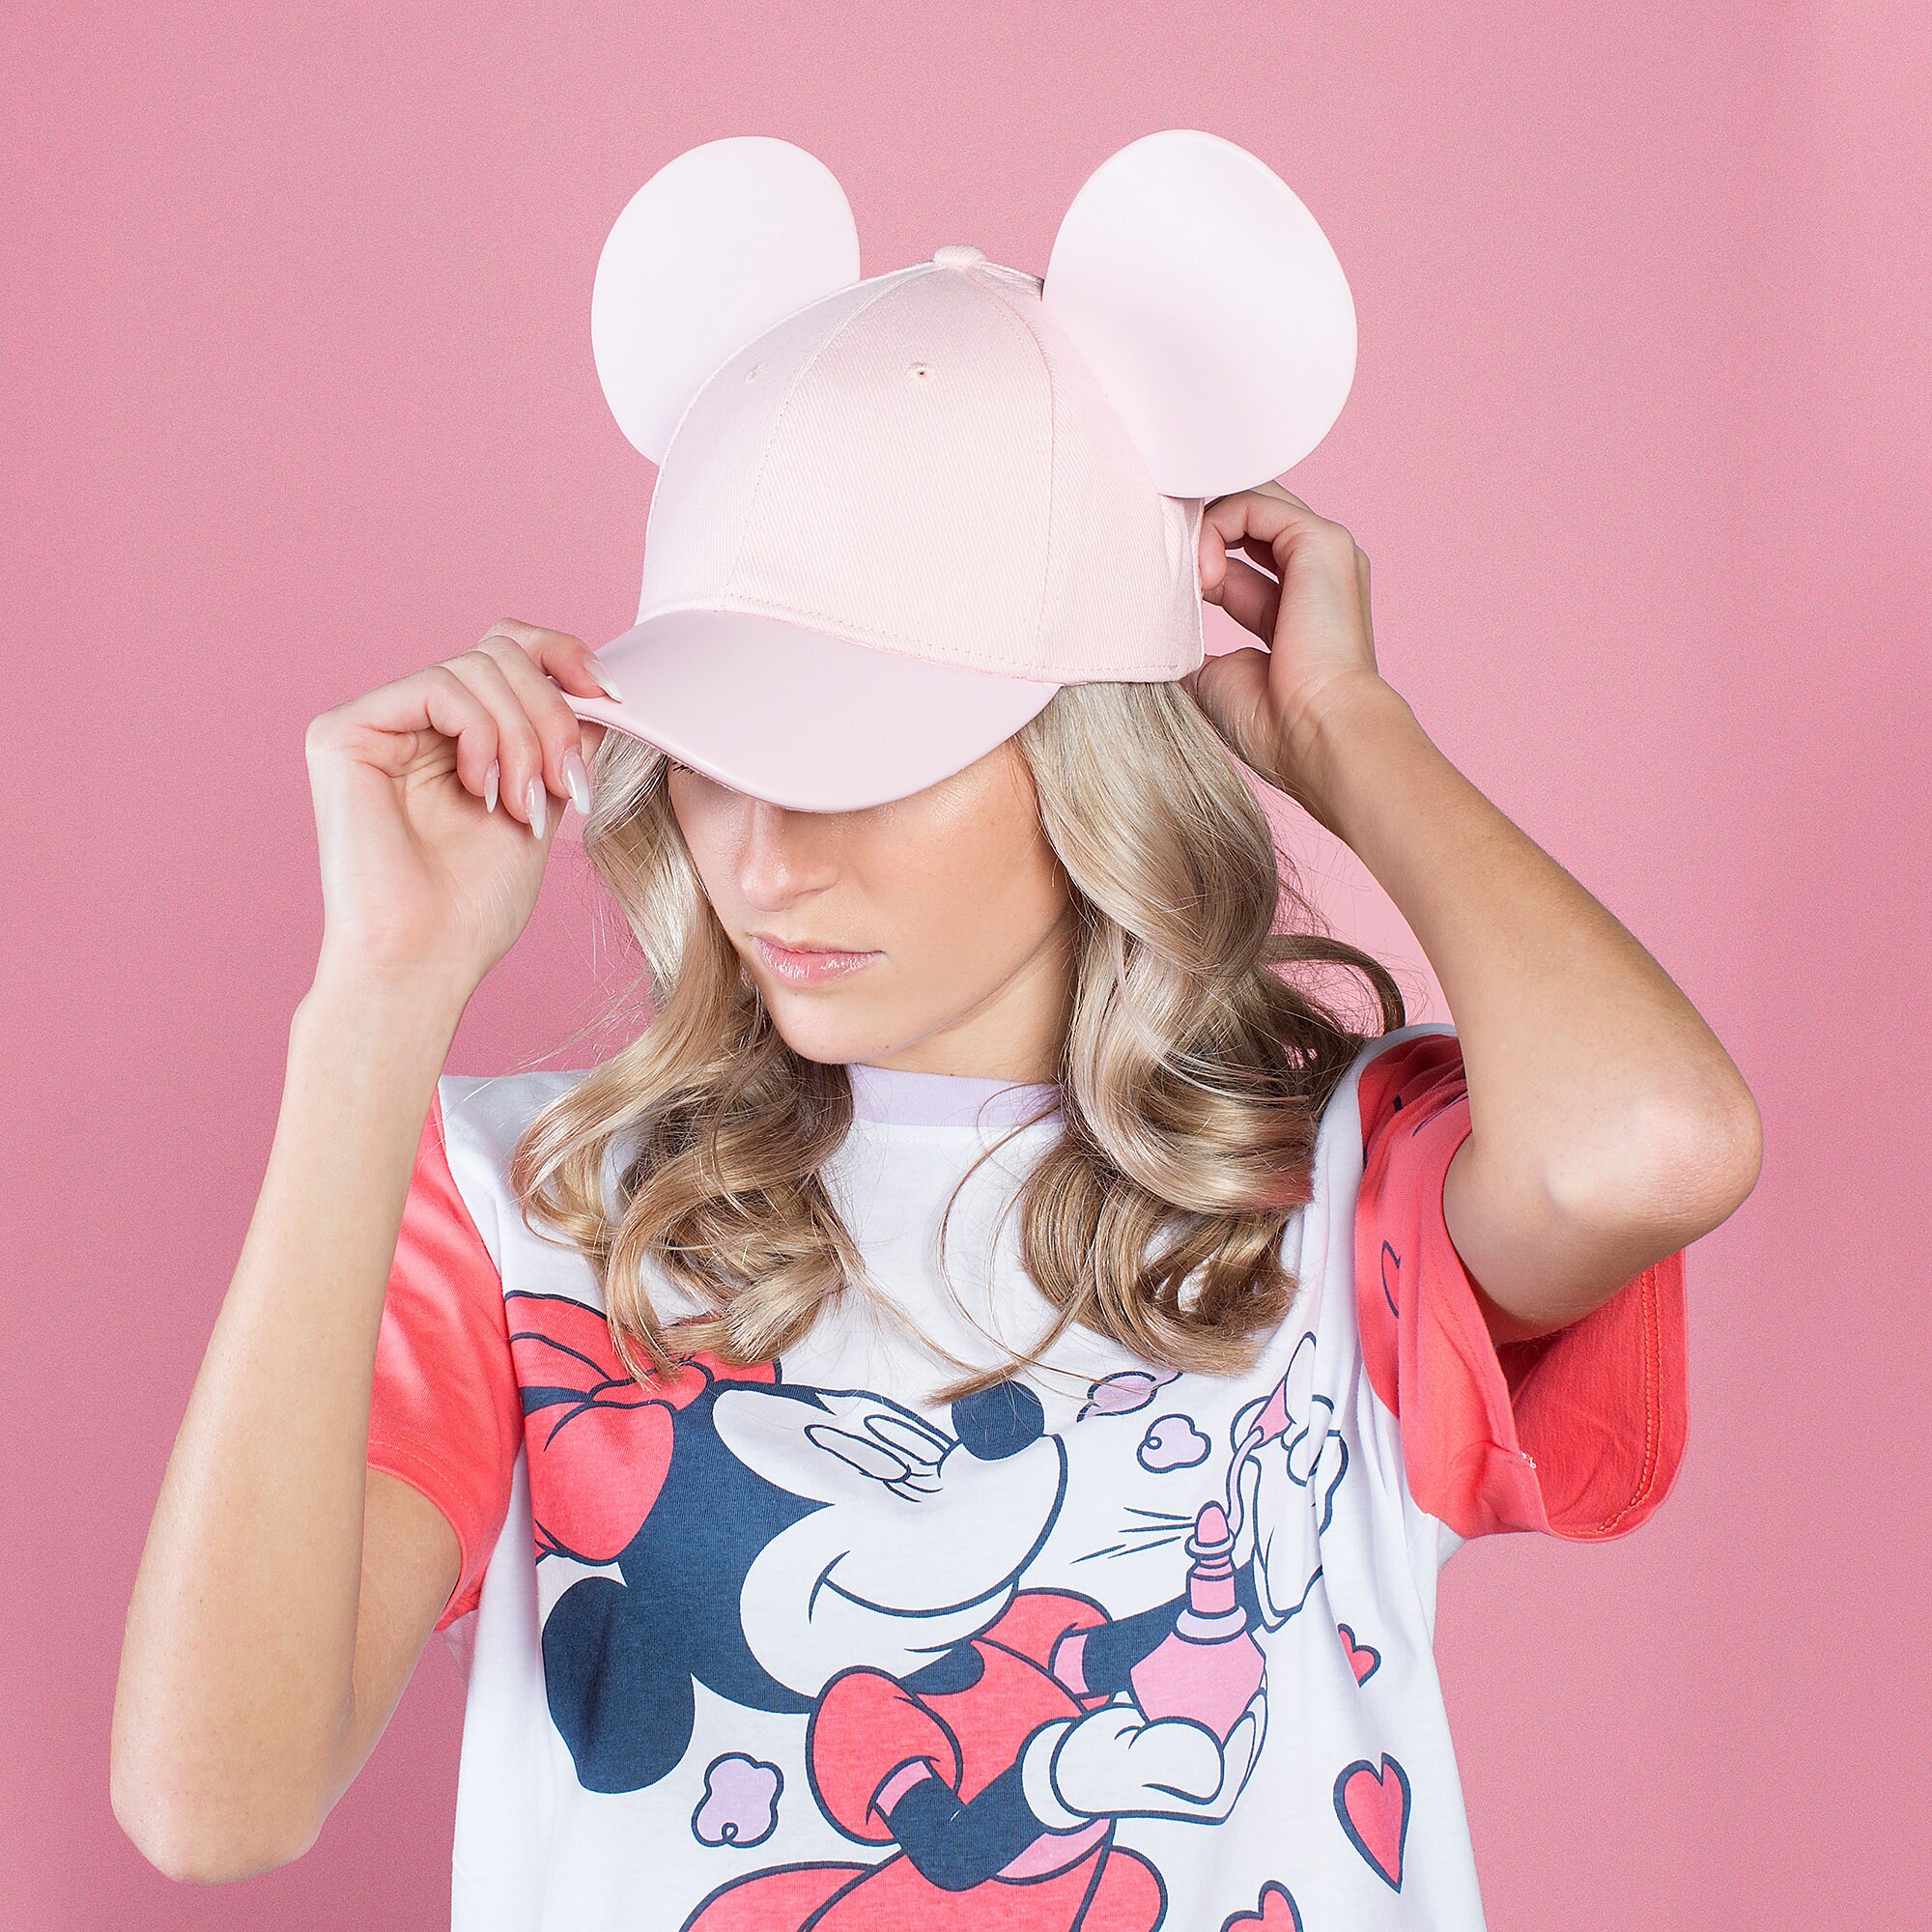 Mickey and Minnie Mouse Perfume T-Shirt Dress for Women by Cakeworthy